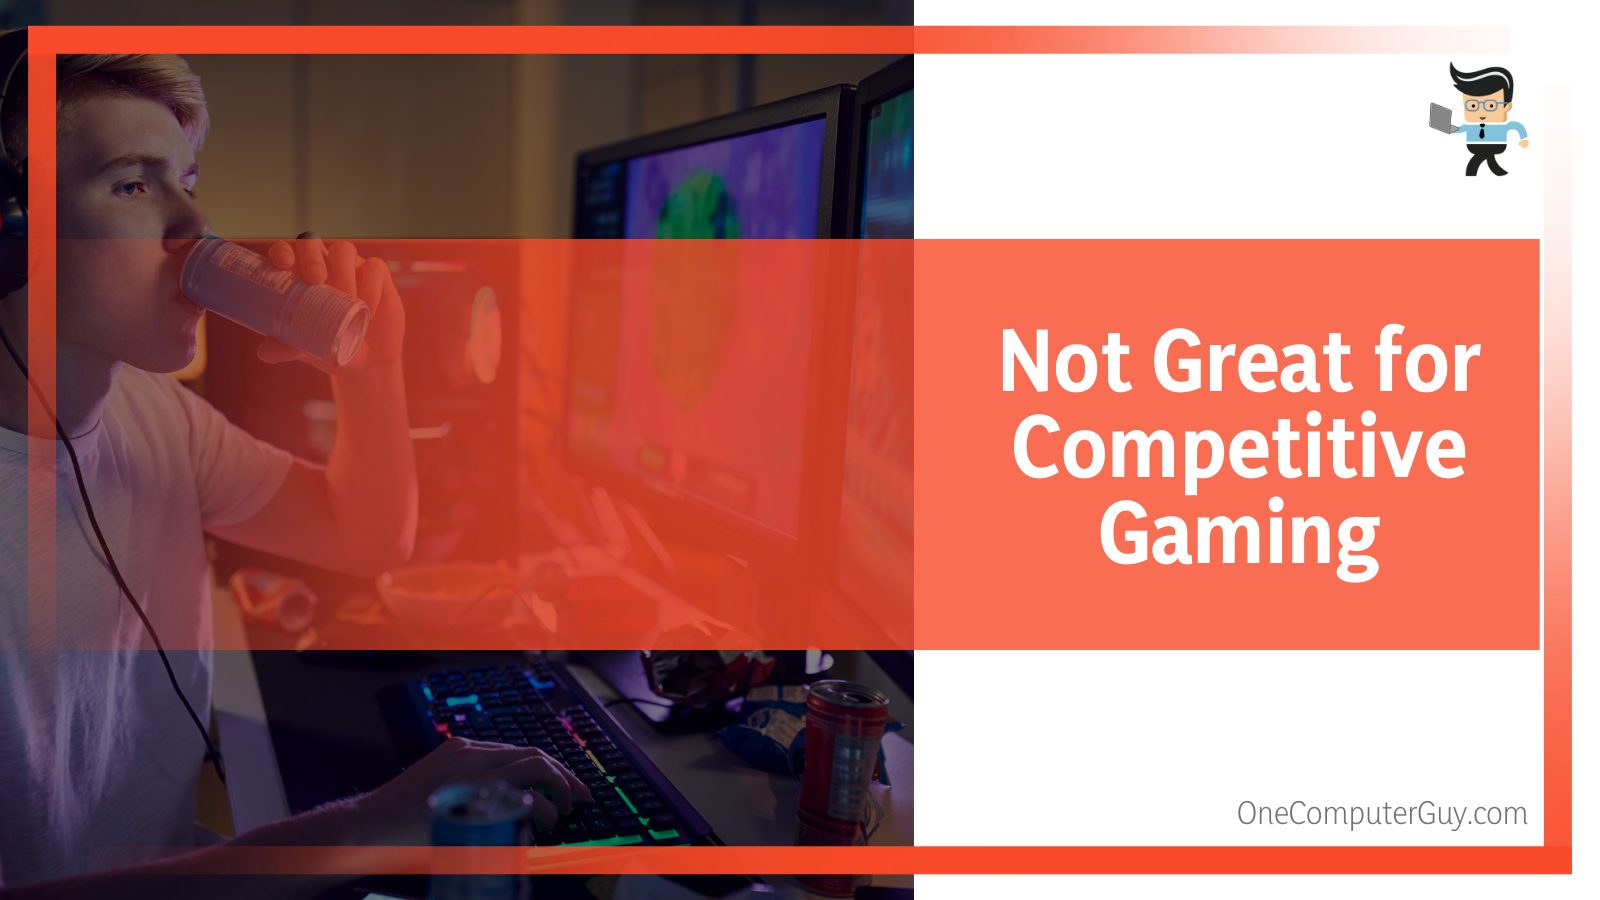 Not Great for Competitive Gaming